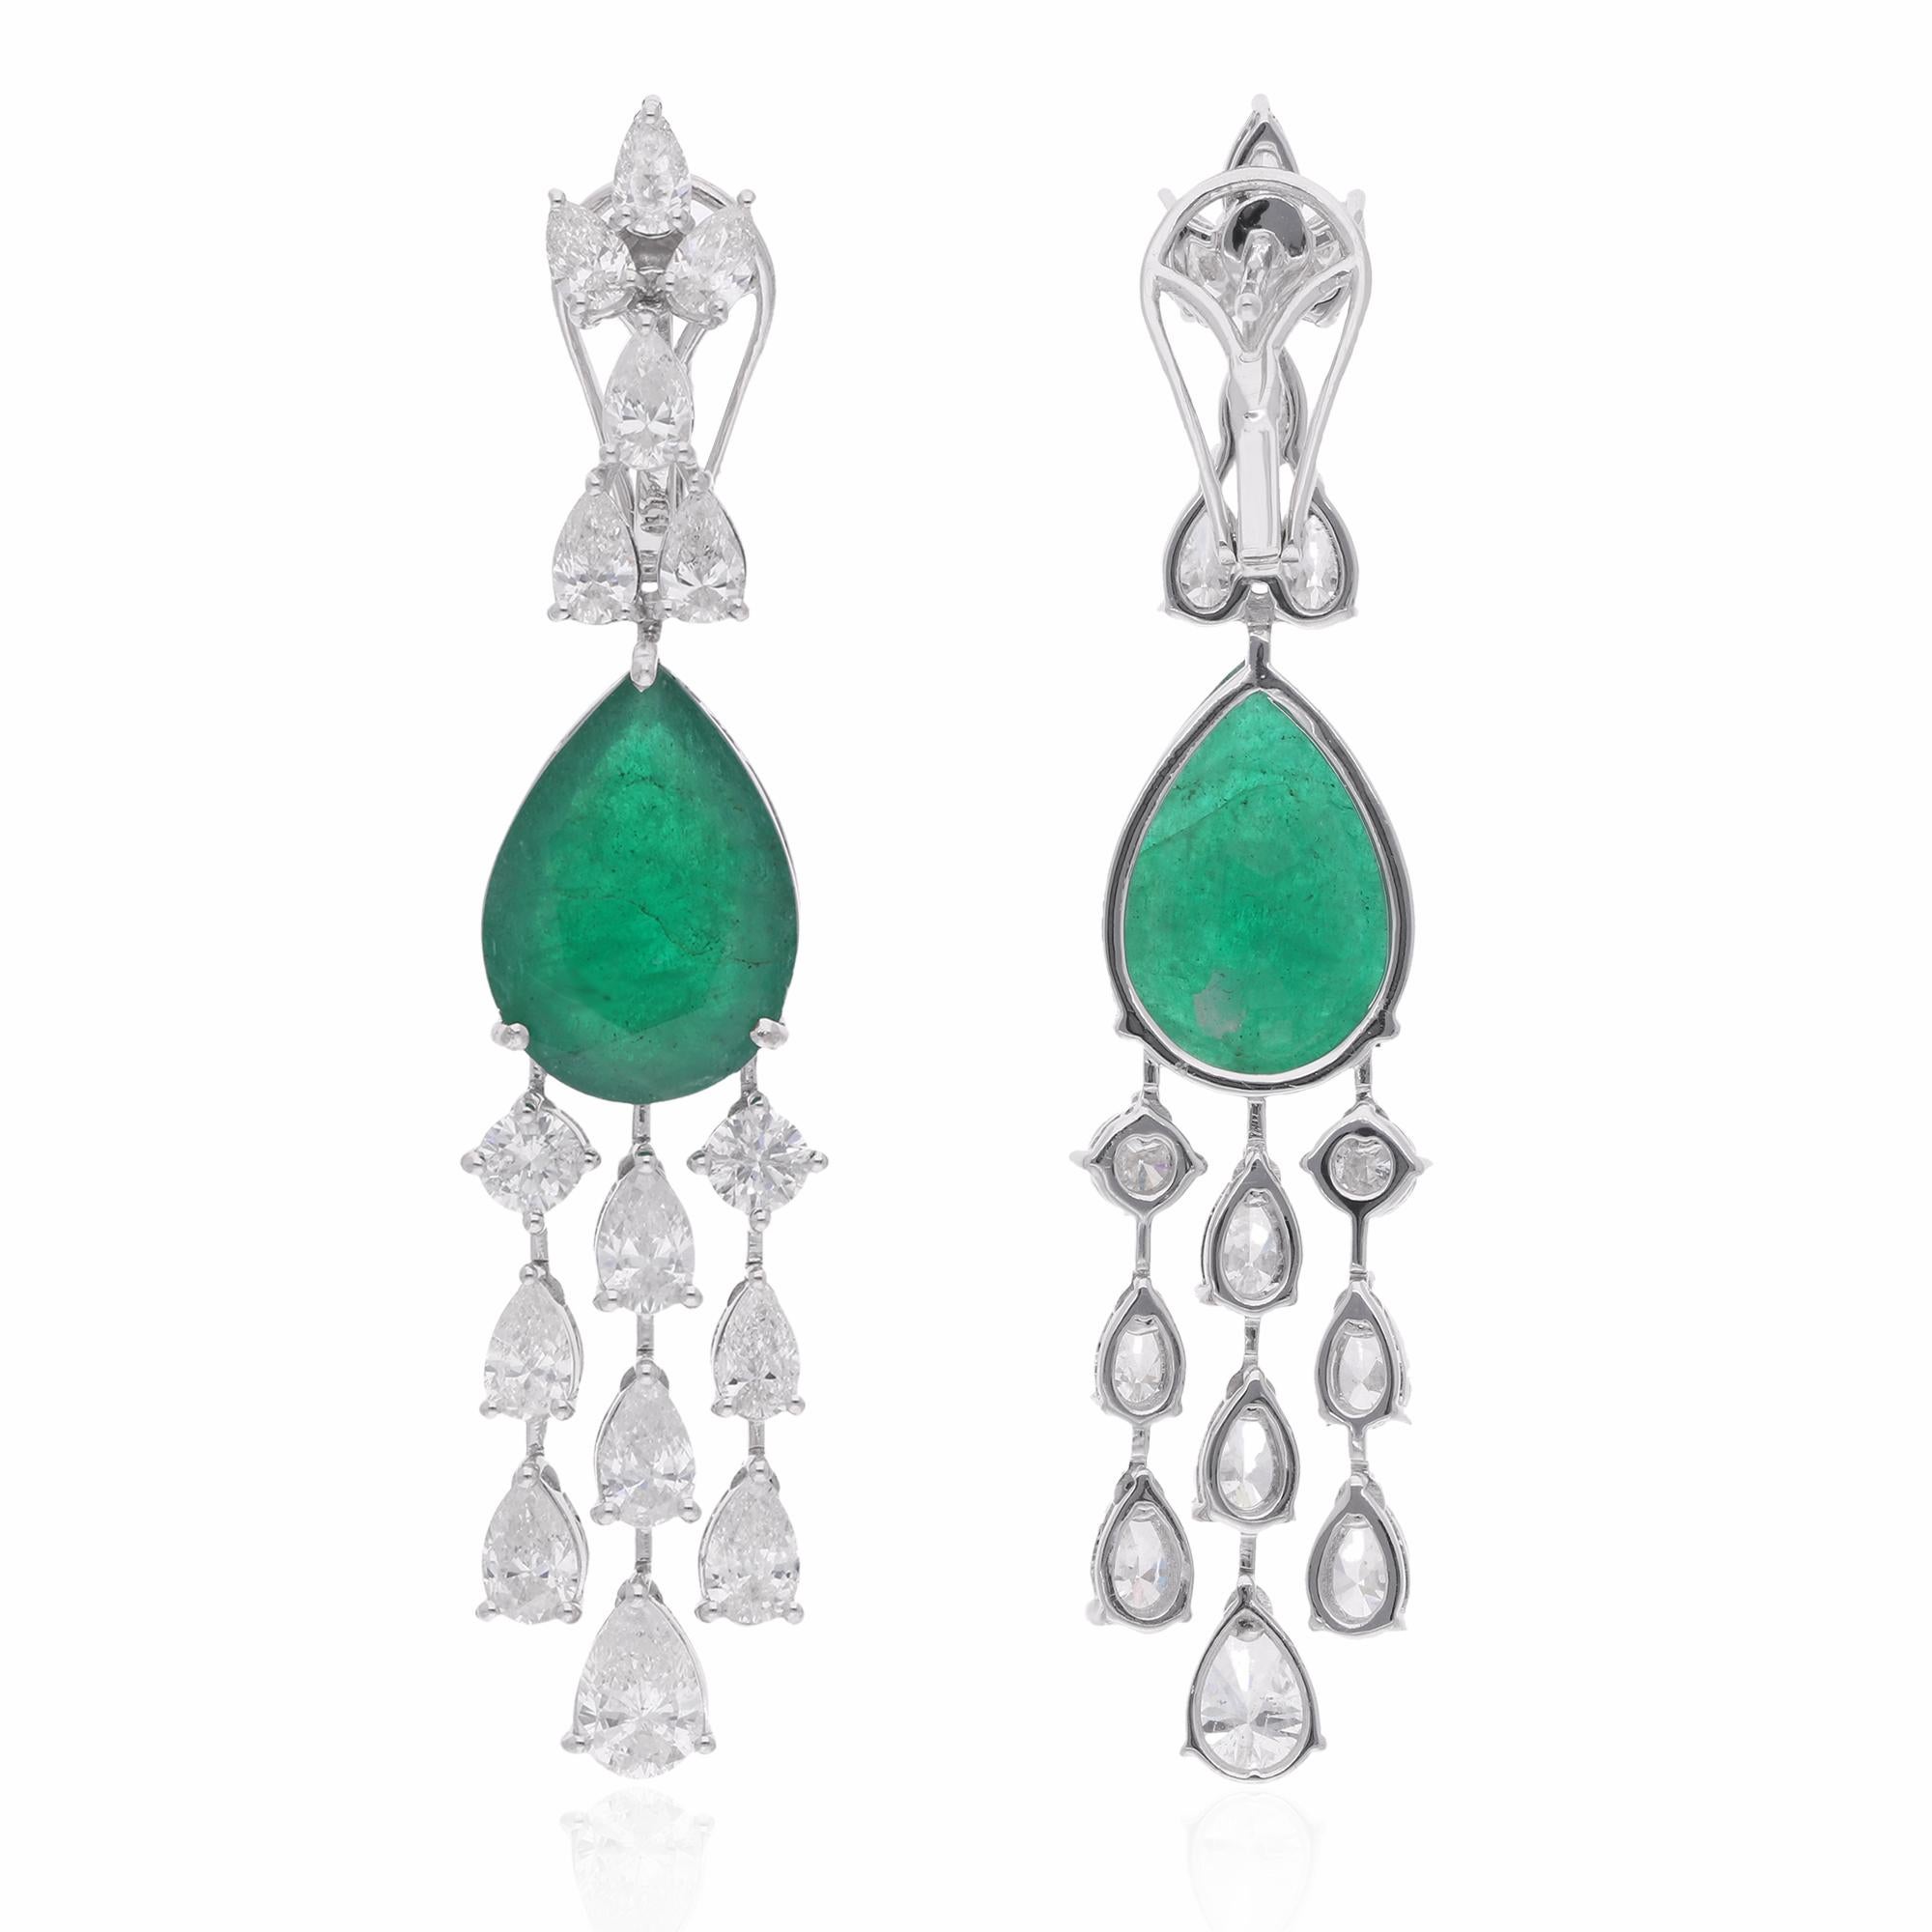 Crafted with meticulous attention to detail, these chandelier earrings exemplify the artistry of fine jewelry. The 14 karat white gold setting provides the perfect backdrop for the gemstones, enhancing their beauty while adding a touch of